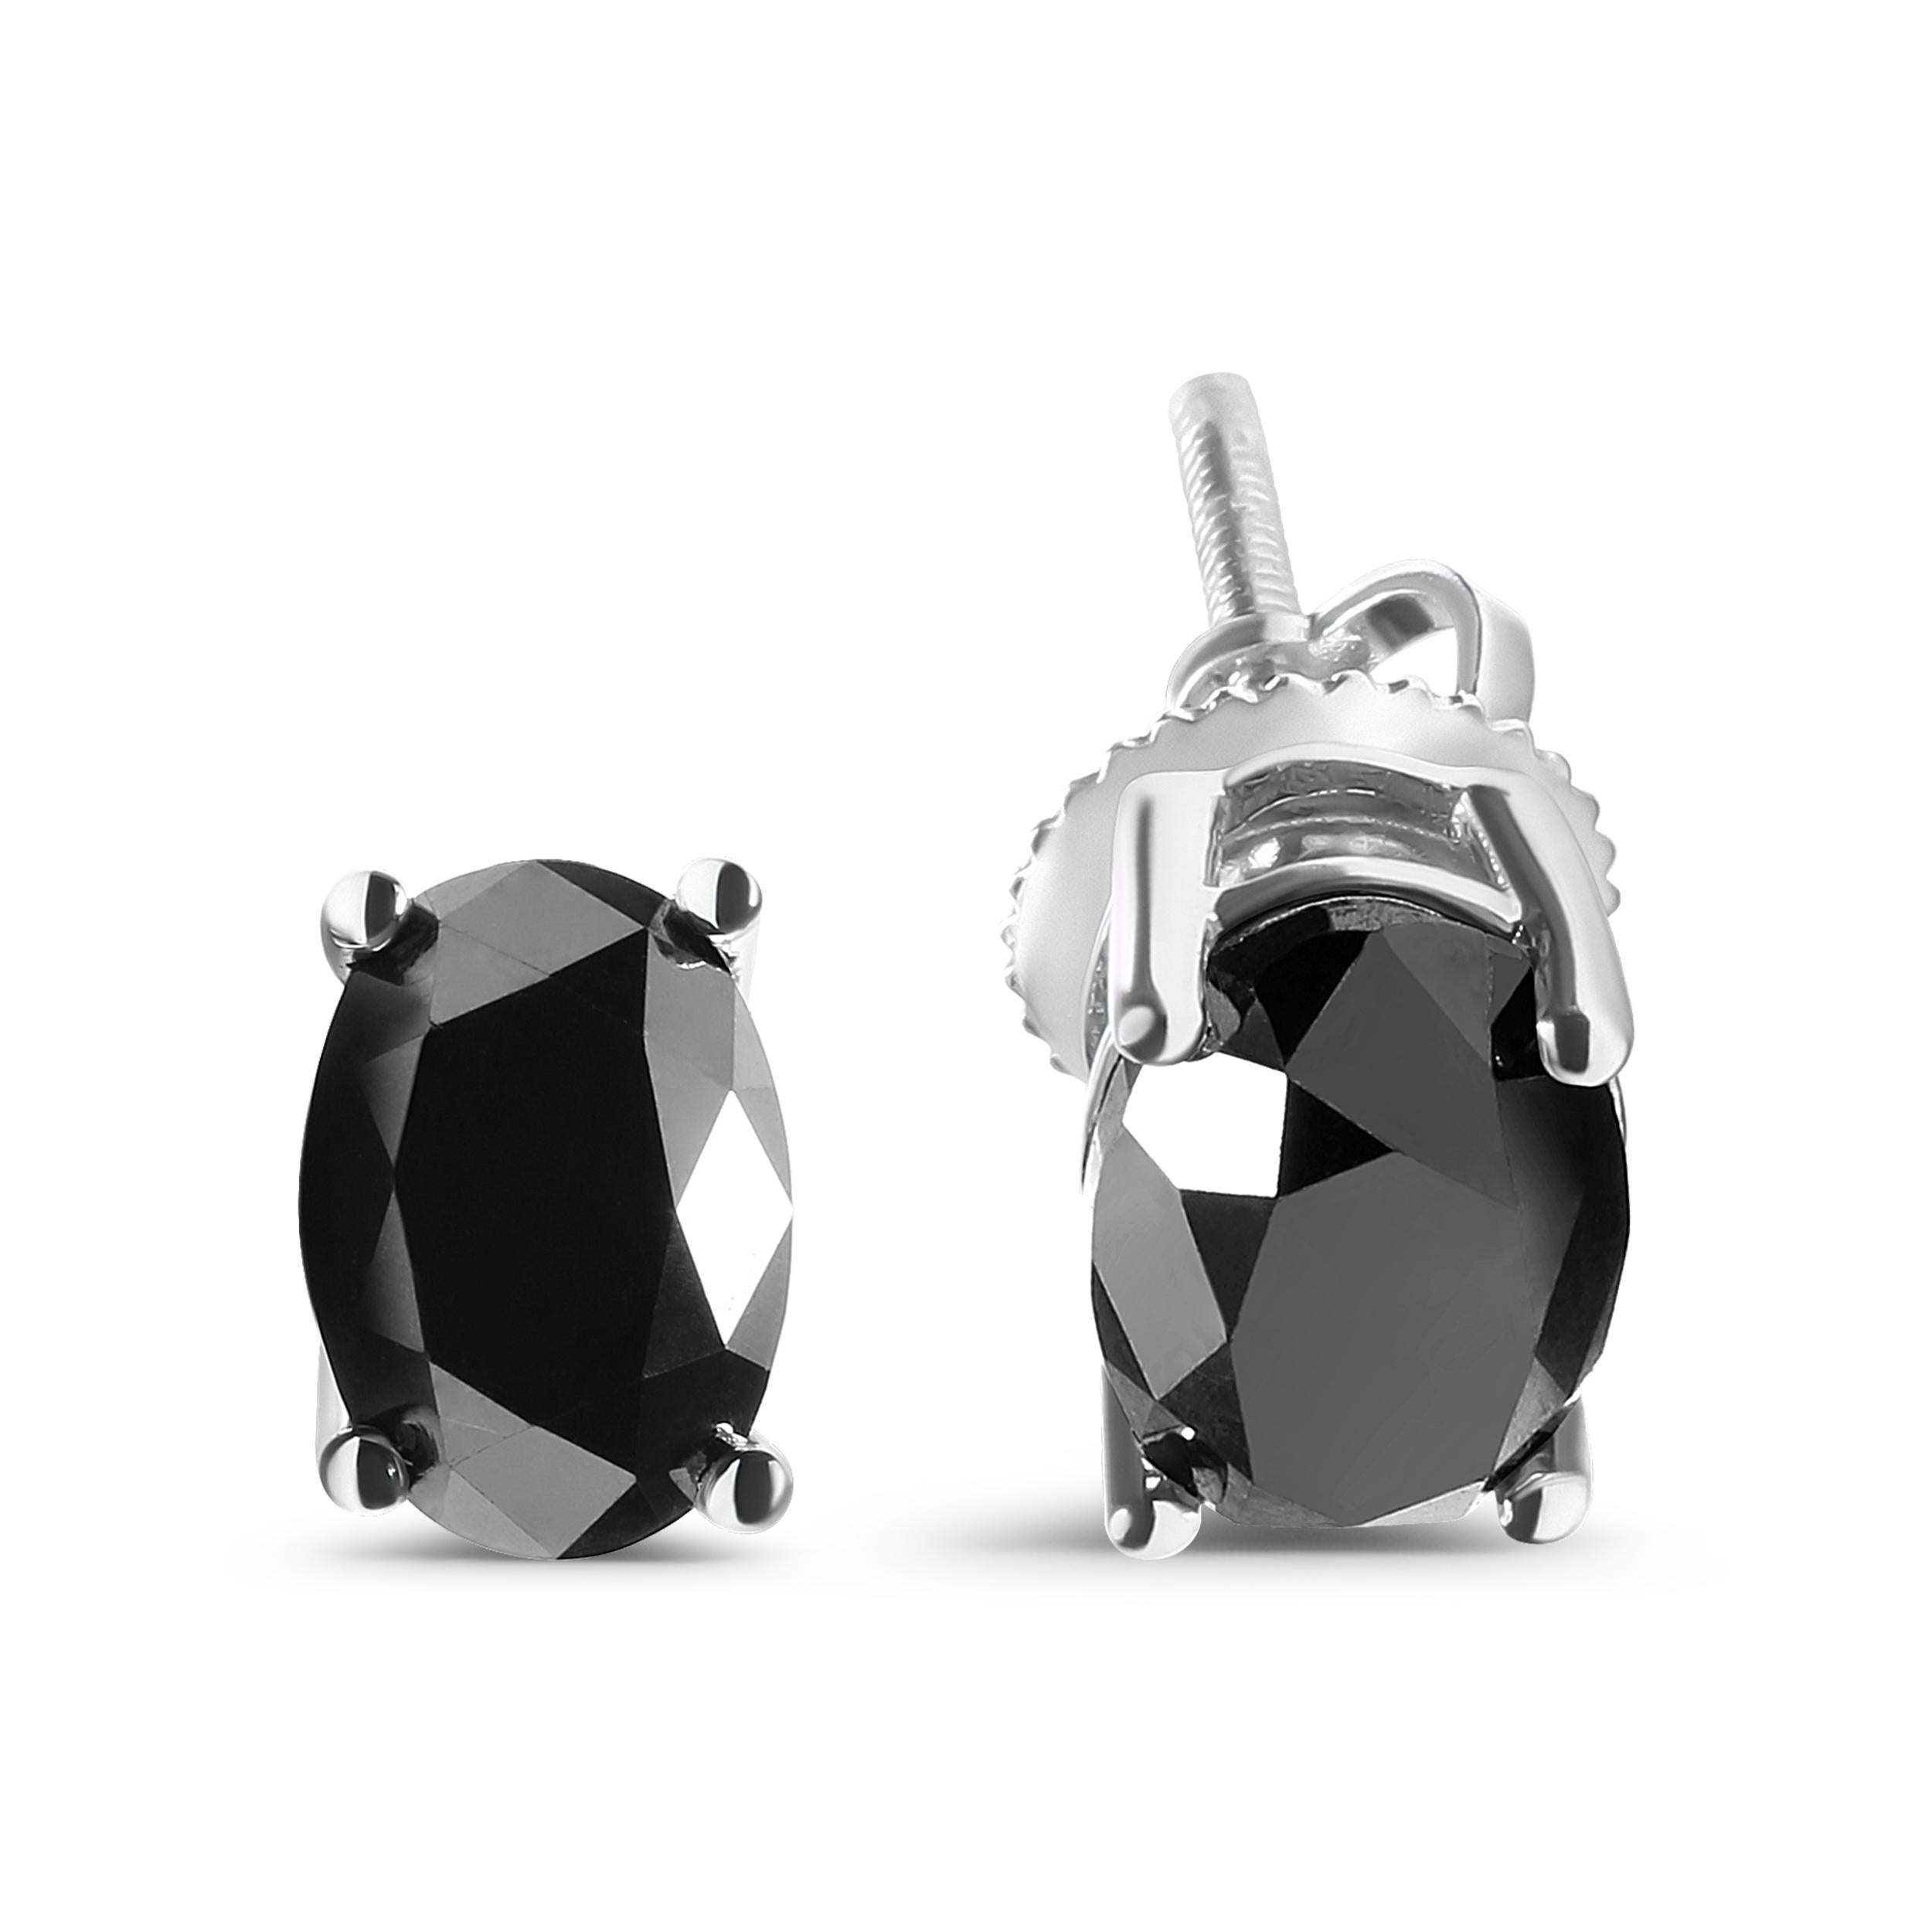 These elegant stud earrings are a true statement piece. Made from 14K white gold, they feature two stunning oval cut black diamonds totaling 3 carats. These natural diamonds have been color treated to enhance their unique hue, giving them a dramatic